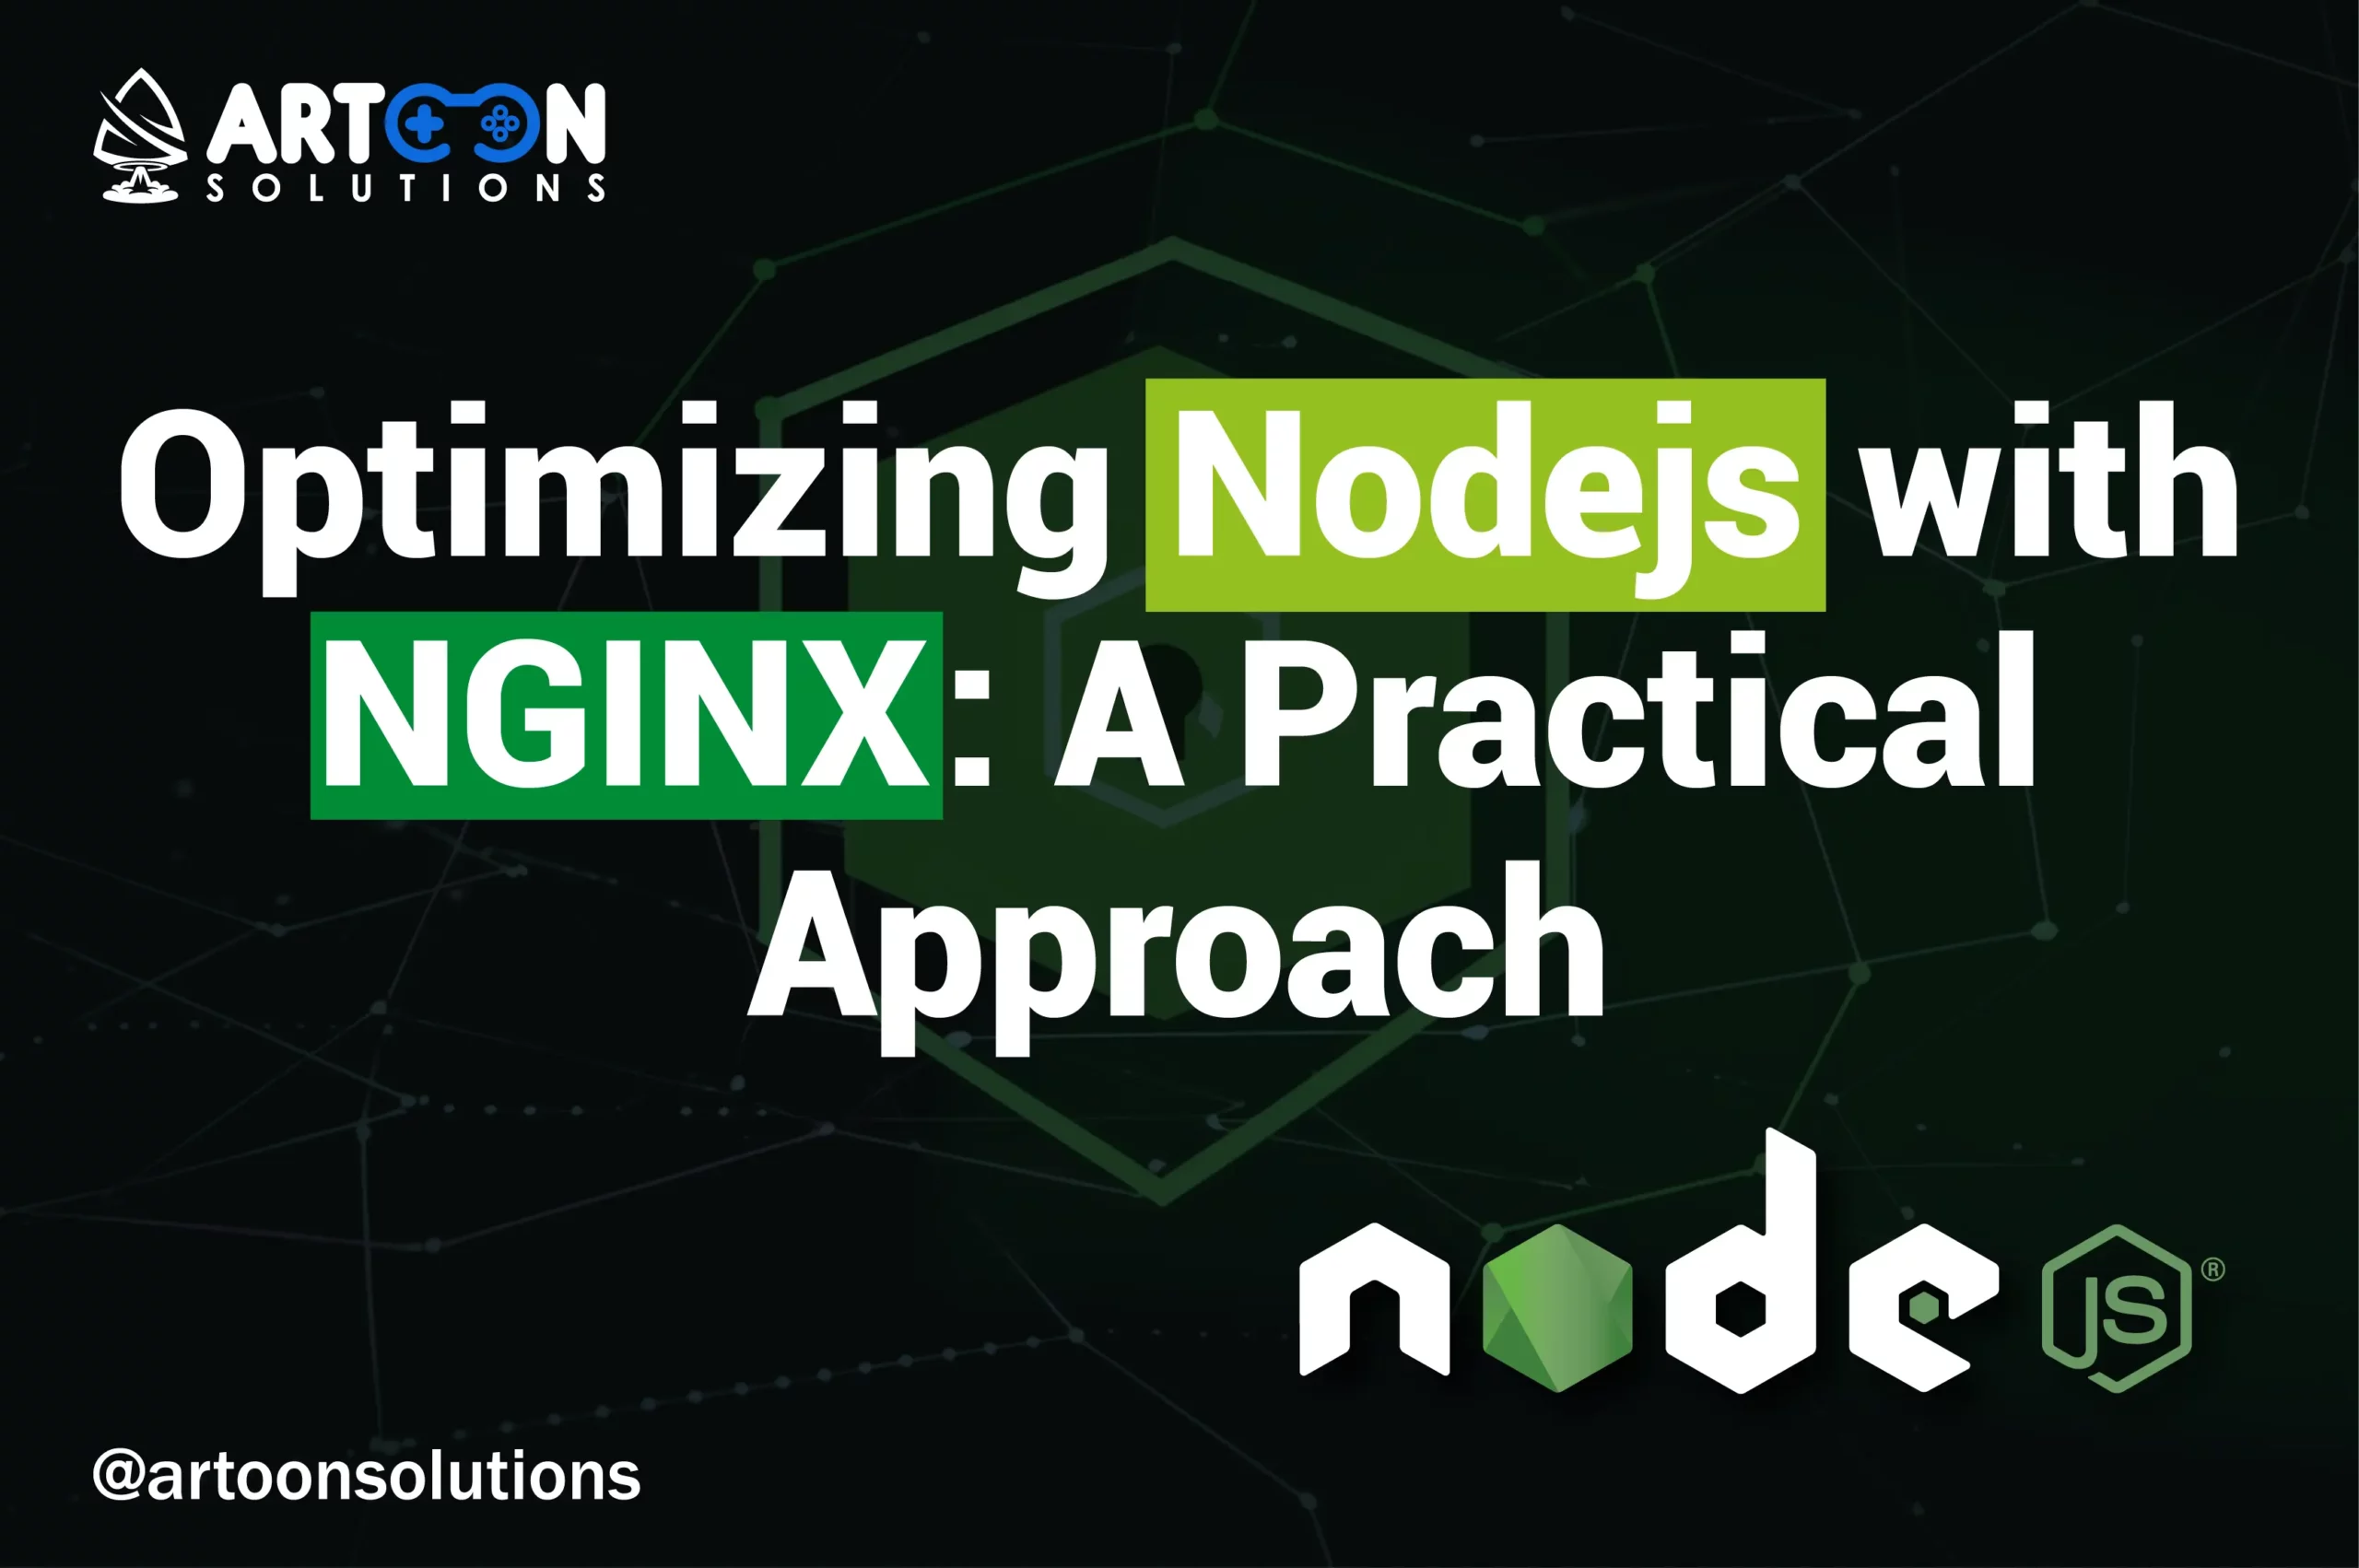 Optimizing Nodejs with NGINX: A Practical Approach